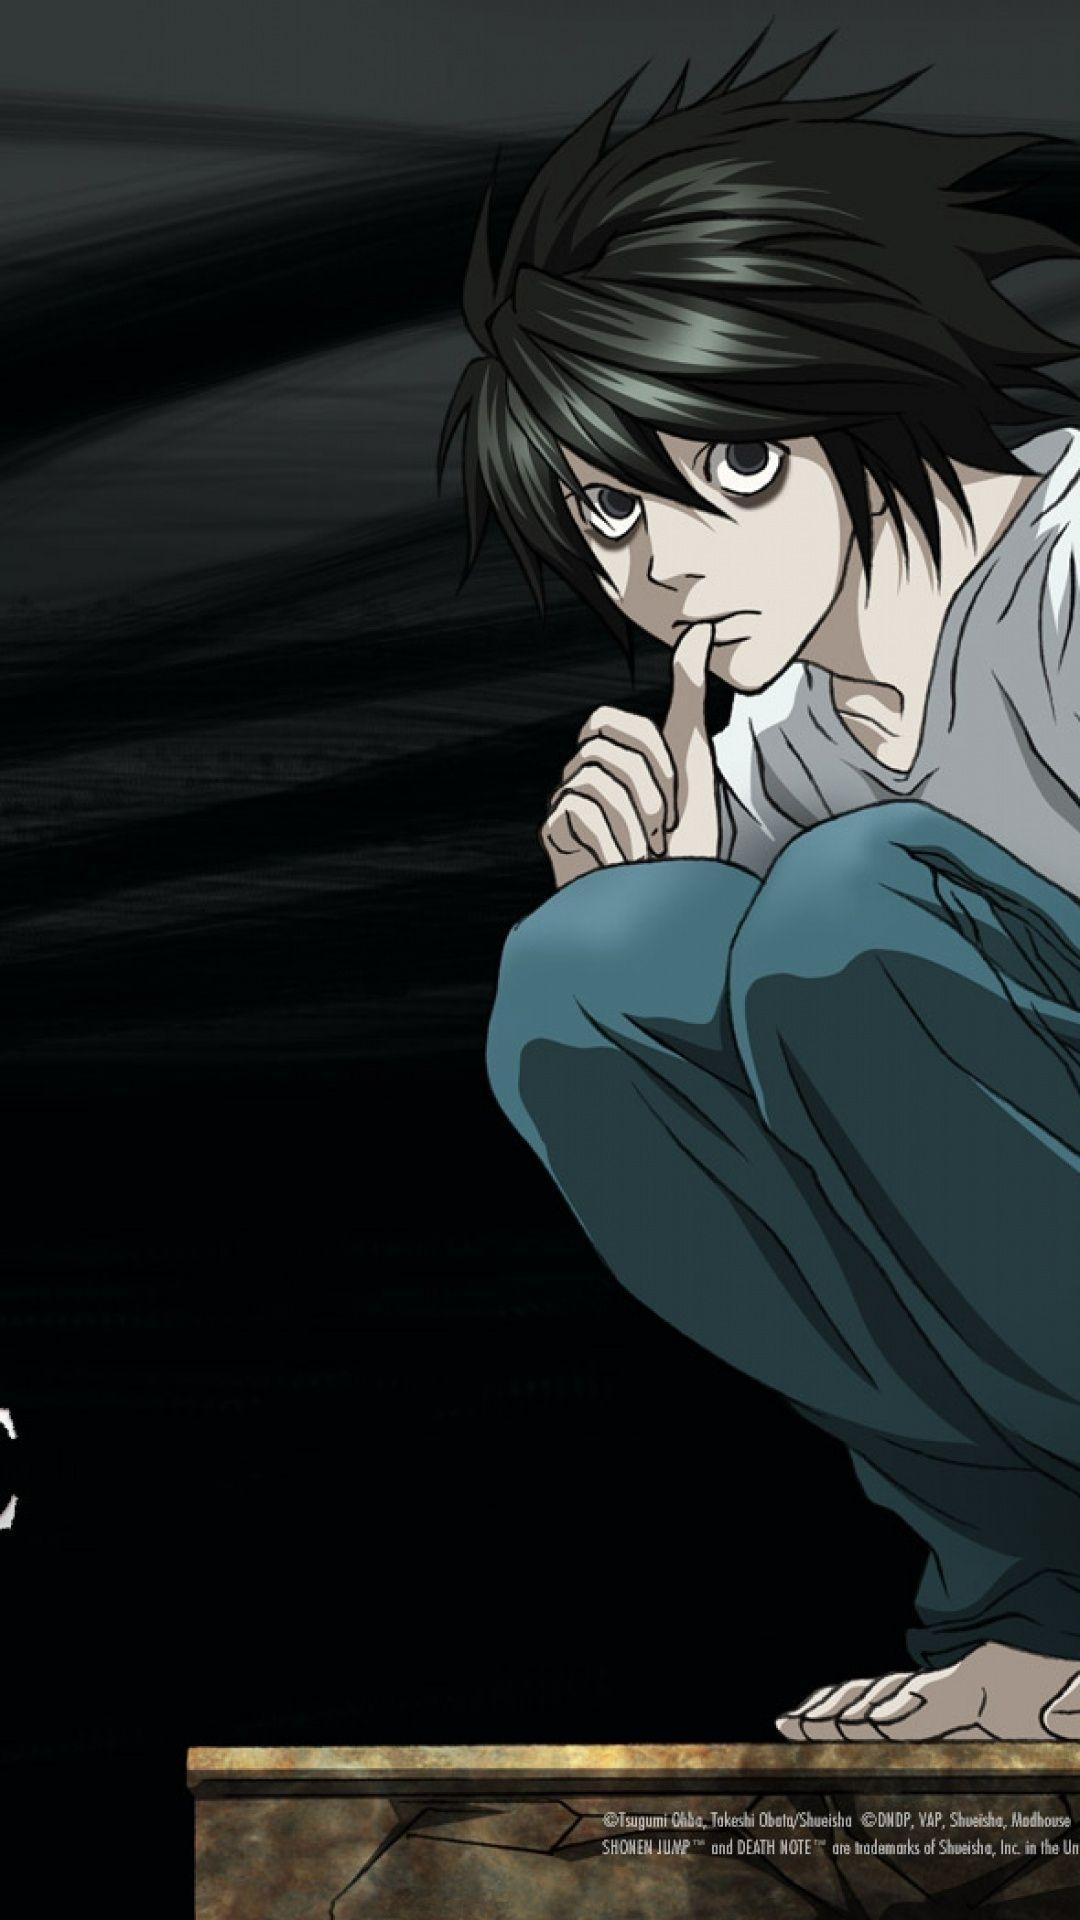 100+] Death Note Iphone Wallpapers | Wallpapers.com